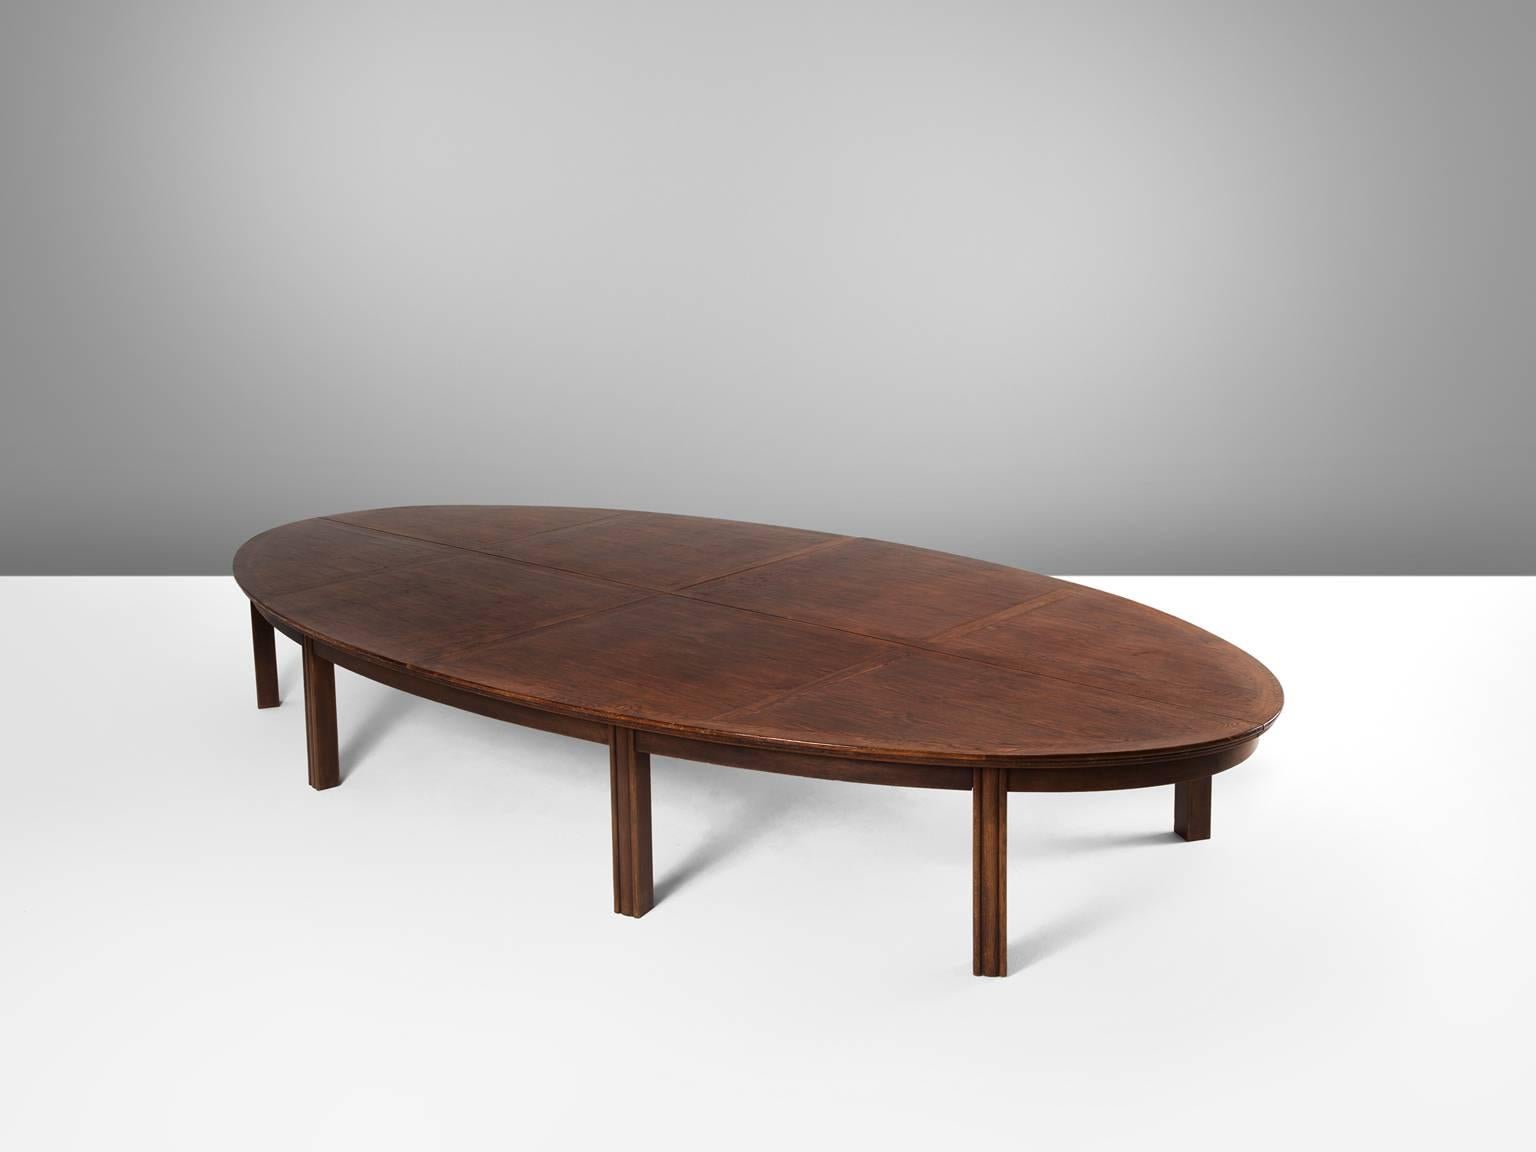 Conference table in oak, the Netherlands, 1950s.

Beautiful aged oval shaped conference or dining table in Art Deco style. The characteristic grain and pattern give this table an authentic and robust look.
 